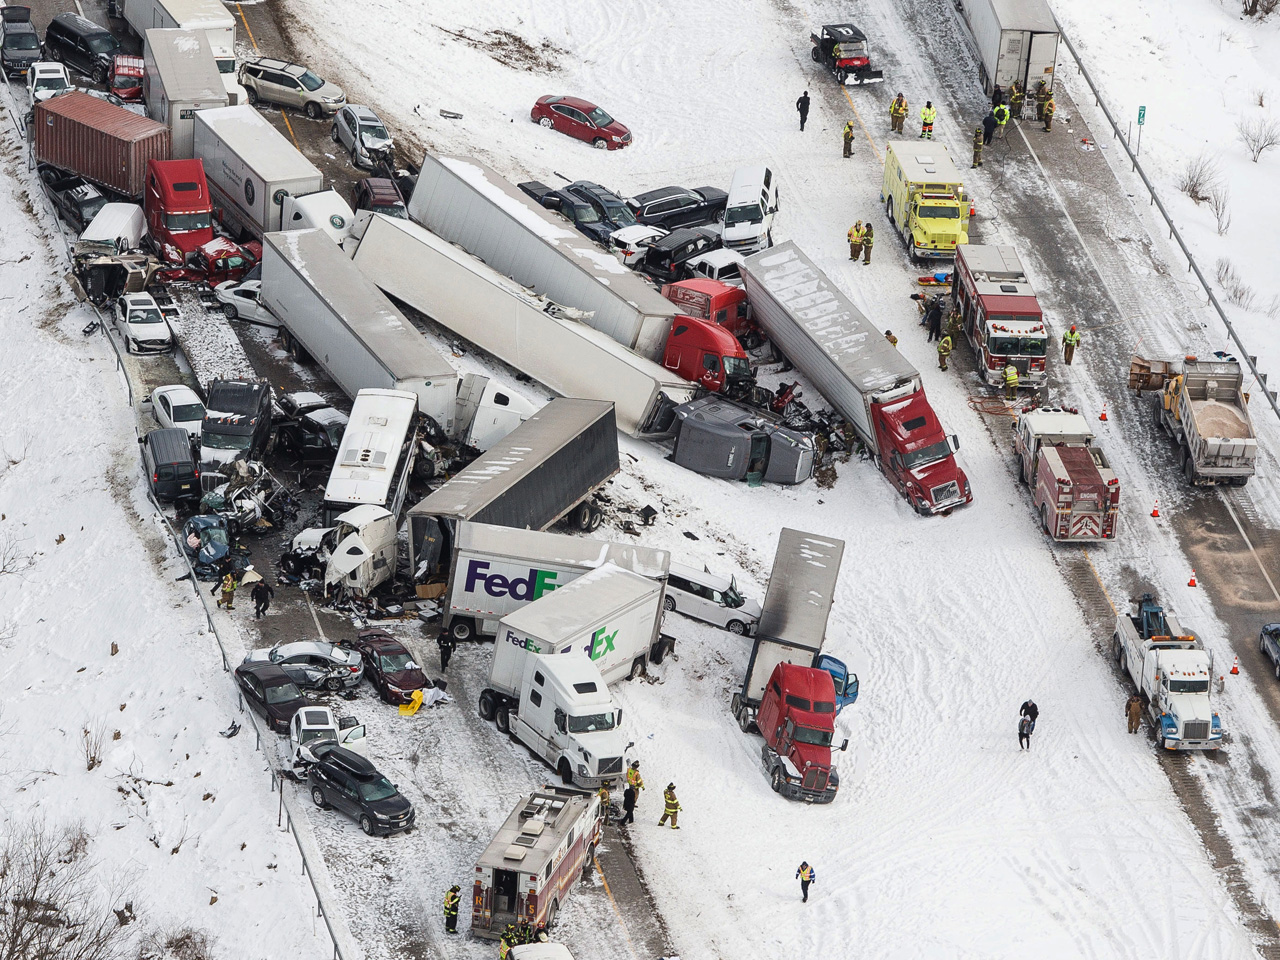 Dozens of vehicles involved in deadly pileup on Interstate 78 in